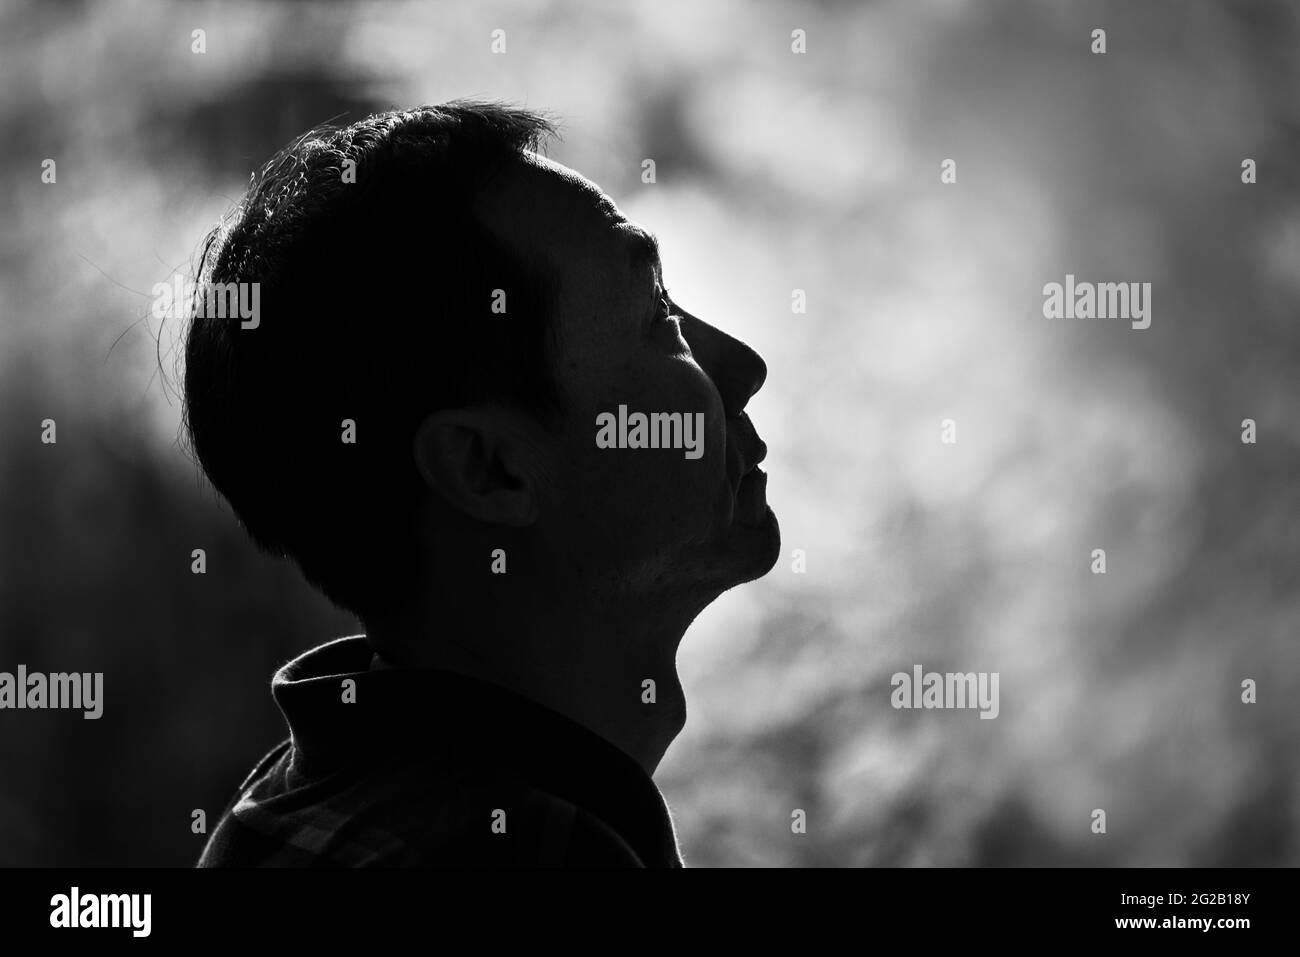 Black and white image of a man looking up with blurred background. Hope concept. Stock Photo